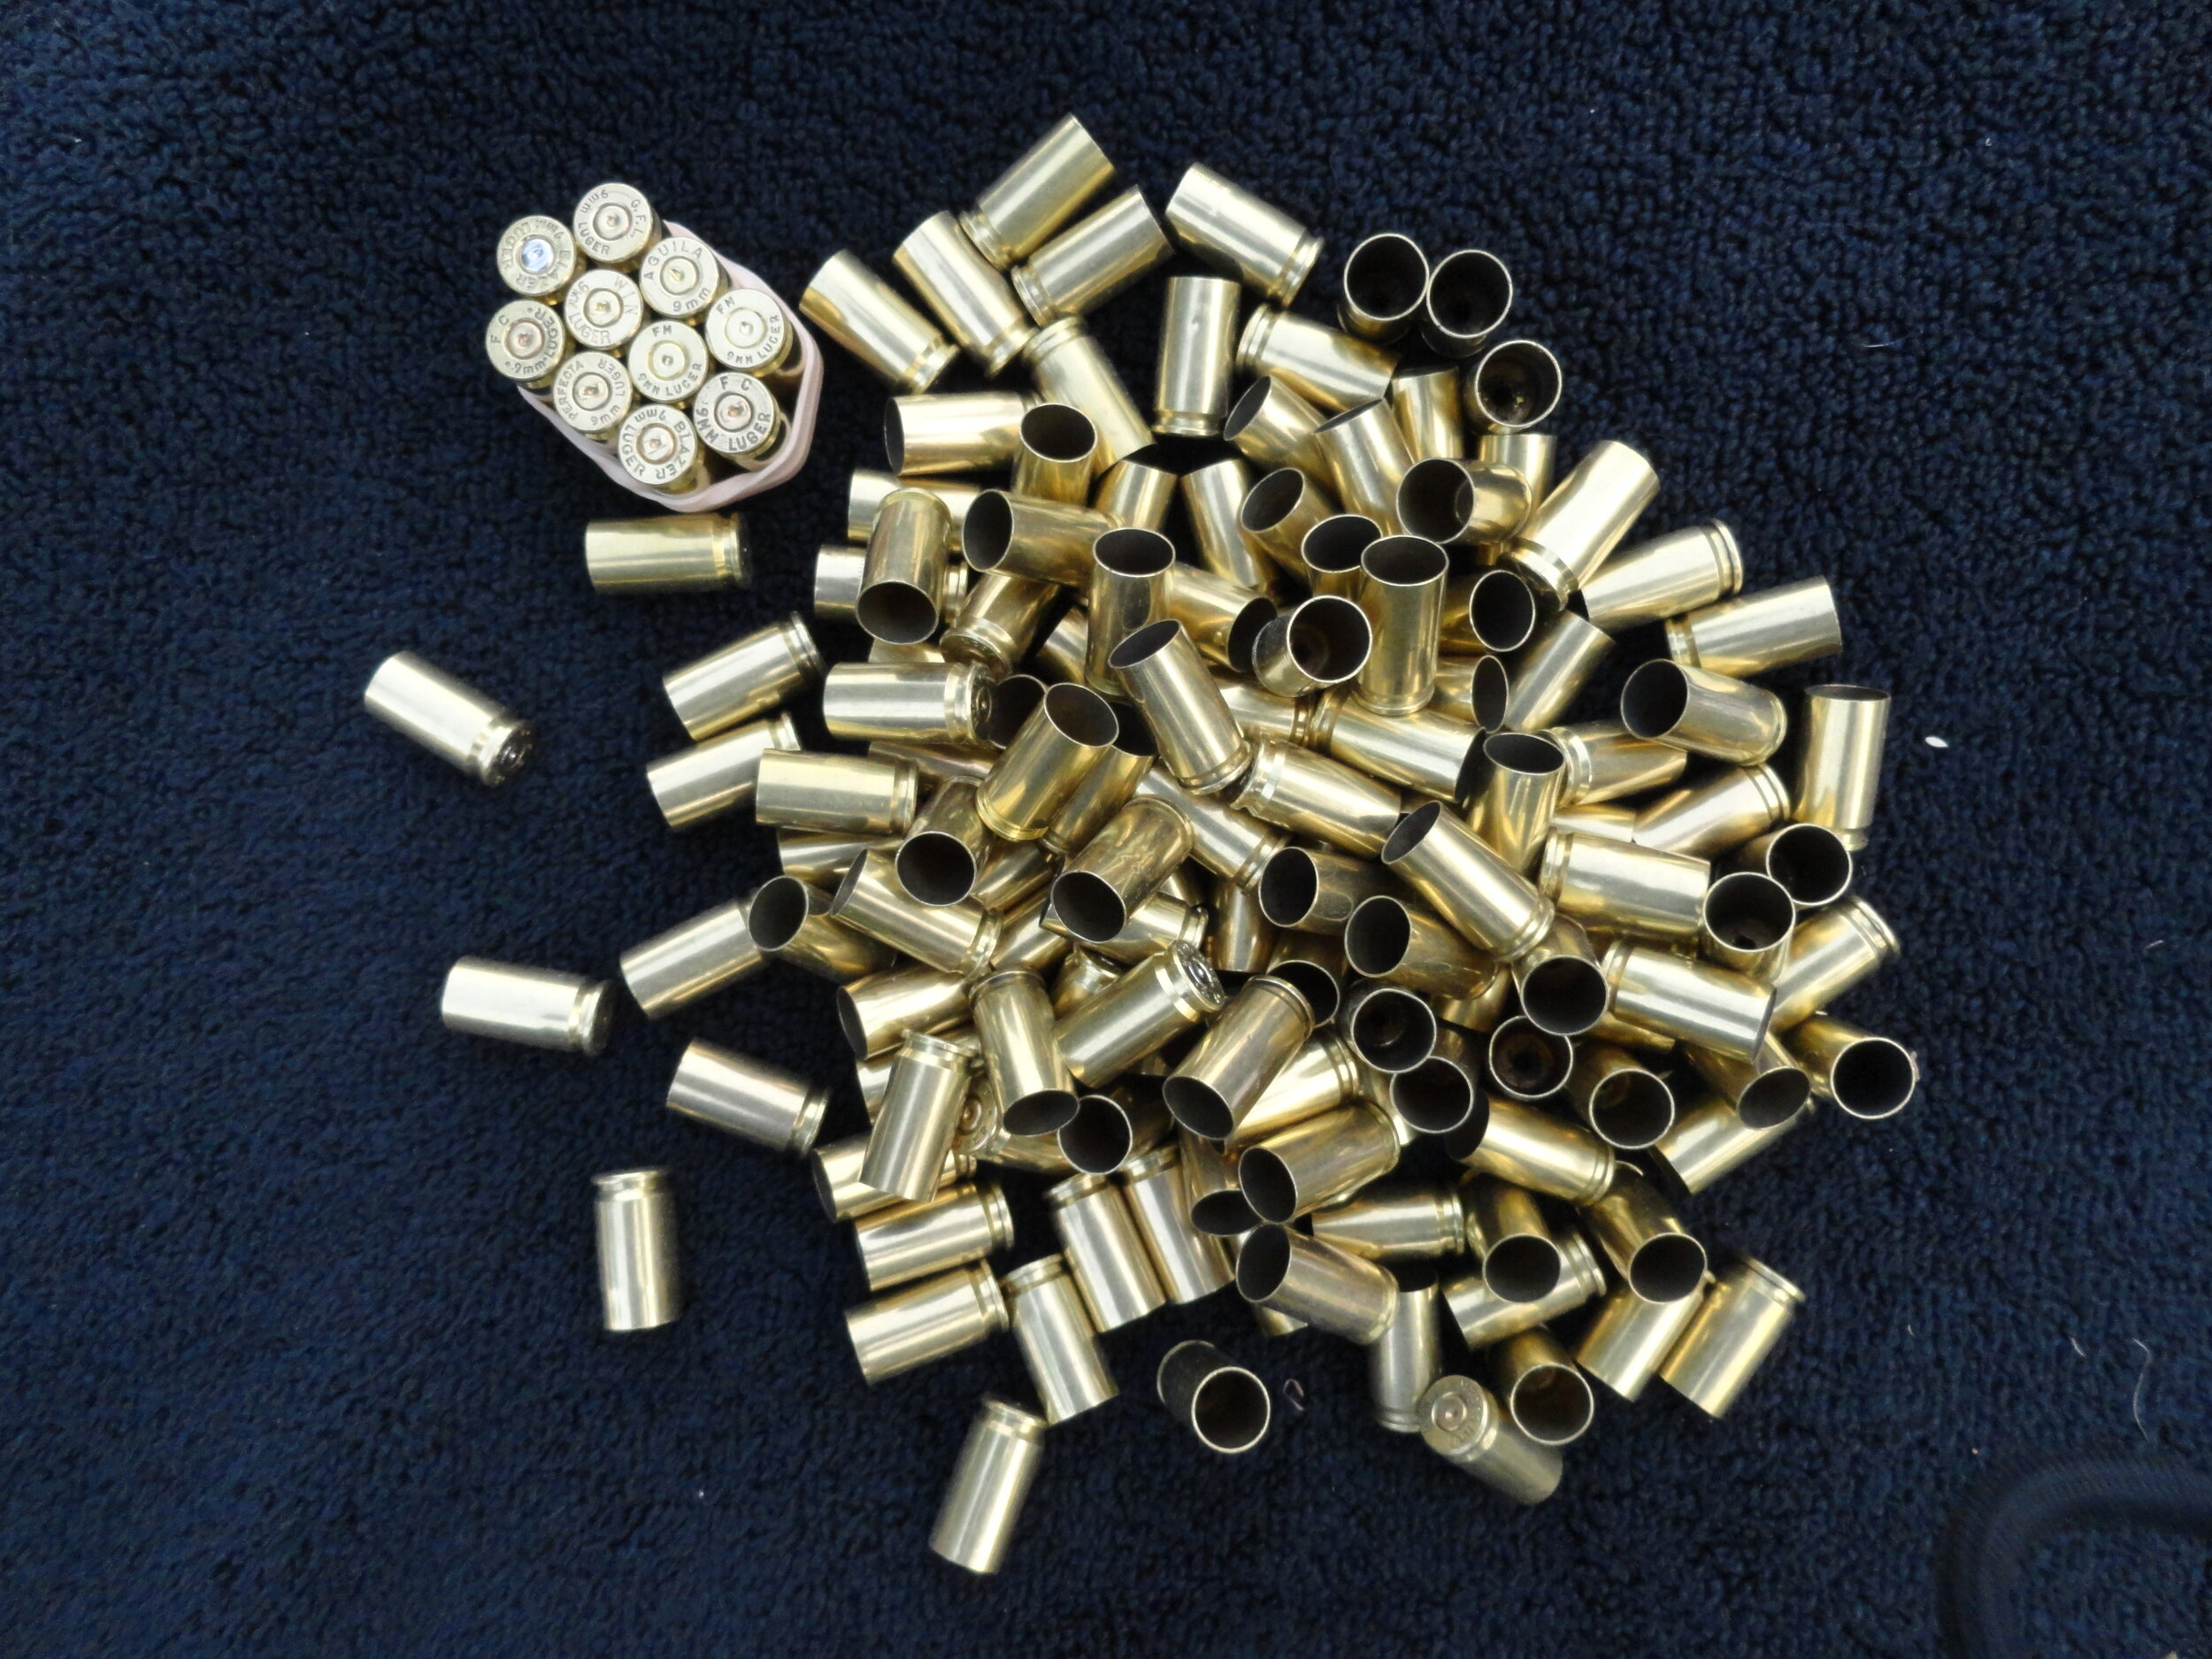 9mm - 500 count - dirty brass — R3Brass - We always give 110%